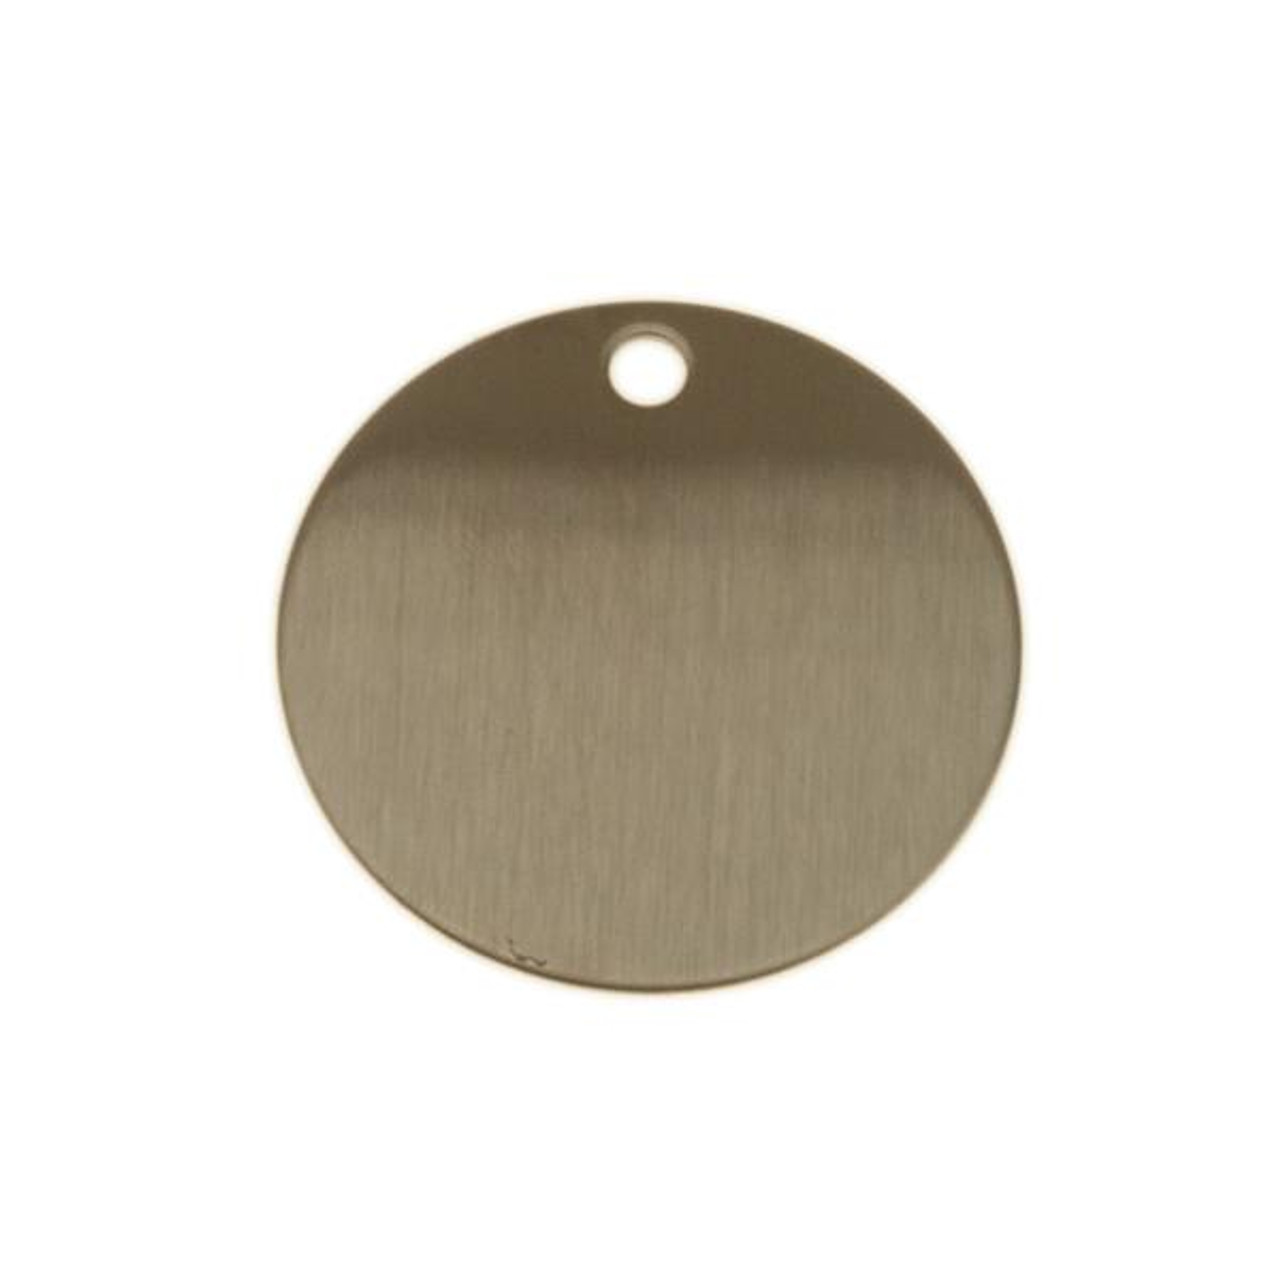 Shop for and Buy Large Round Aluminum Tag 1-1/2 Inch - BLANK at